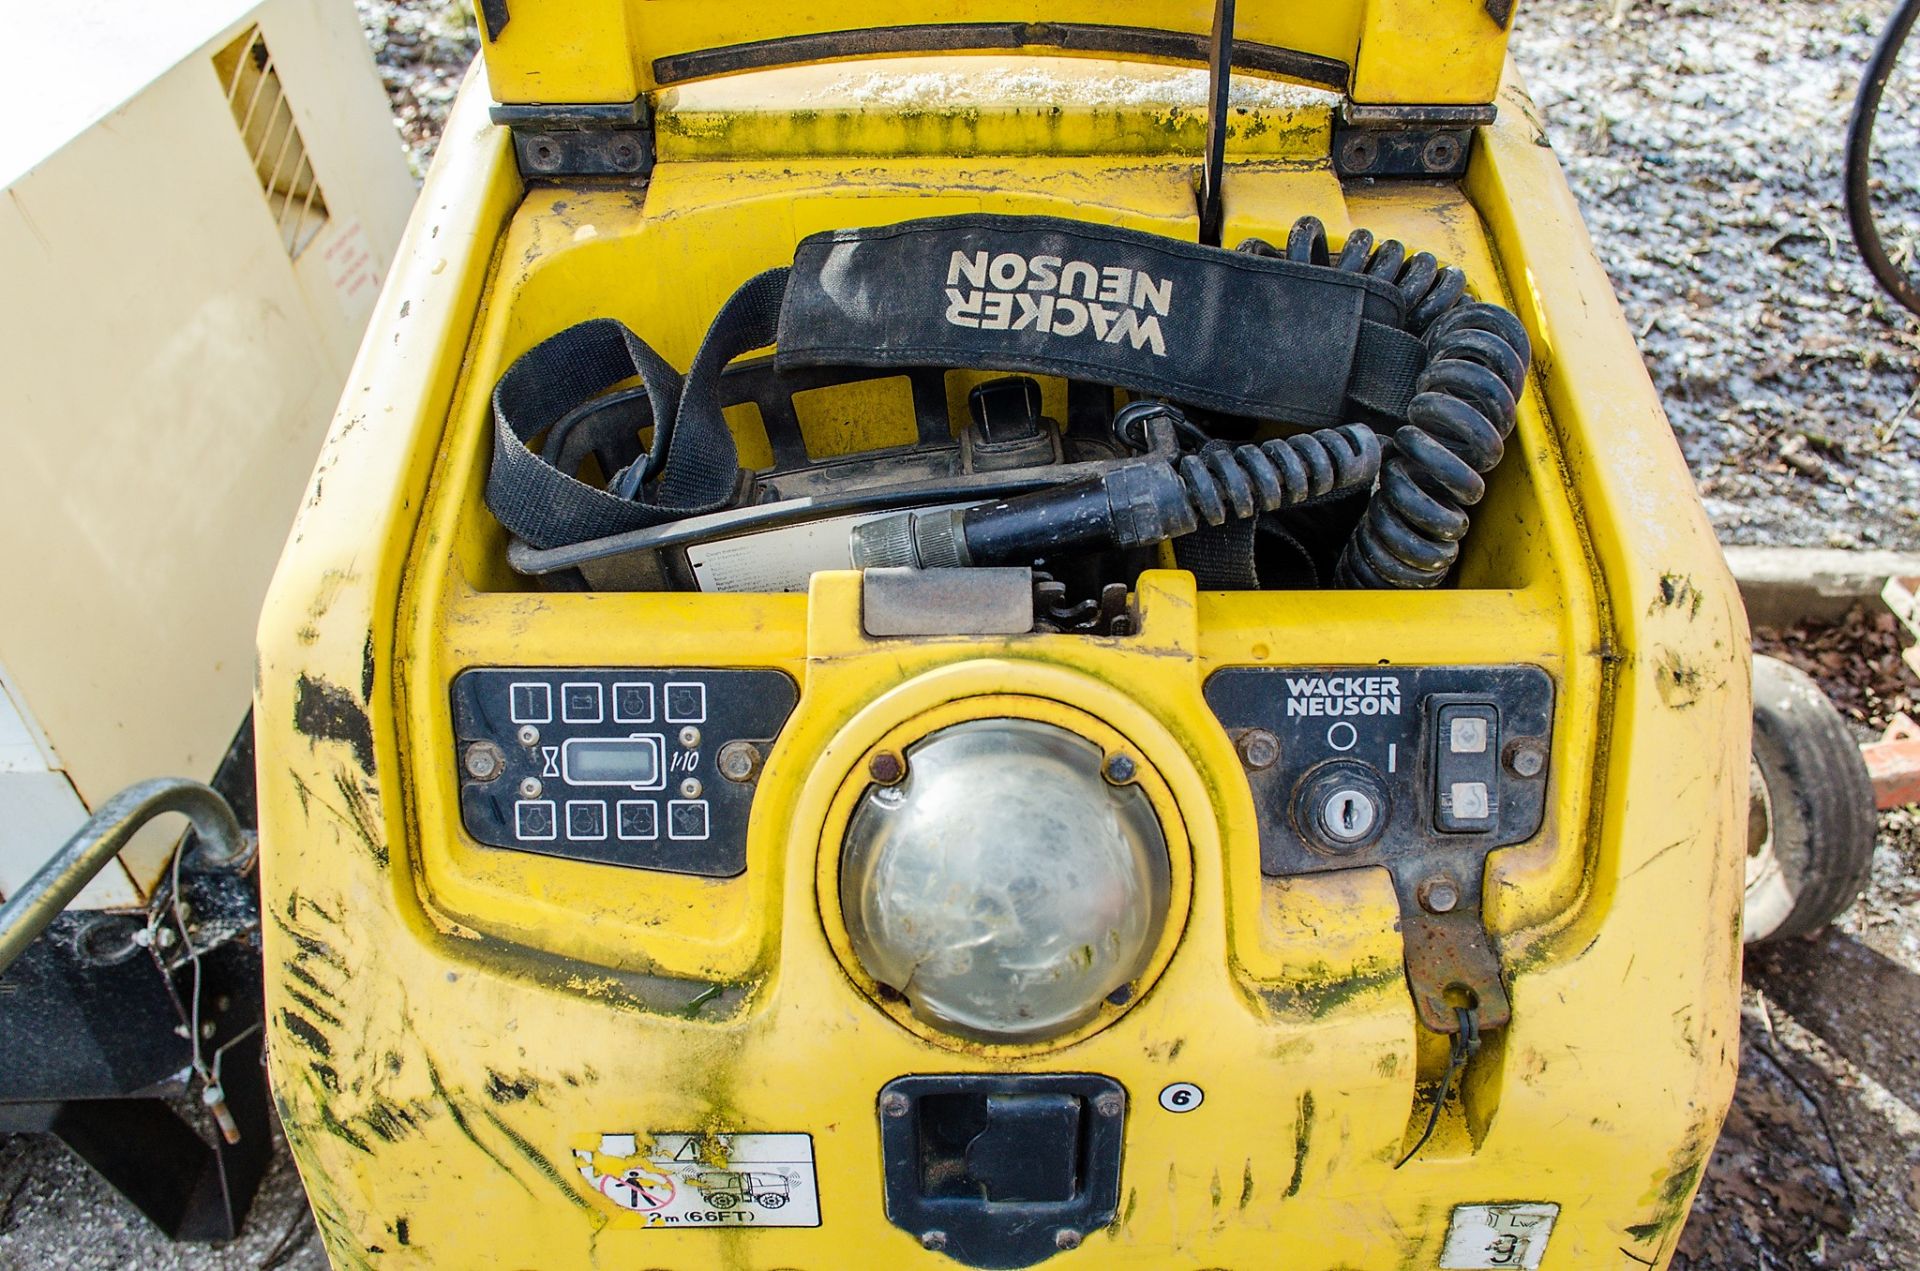 Wacker Neuson RTXSC2 double drum trench rollers c/w remote control Year: 2014 A642068 - Image 7 of 10